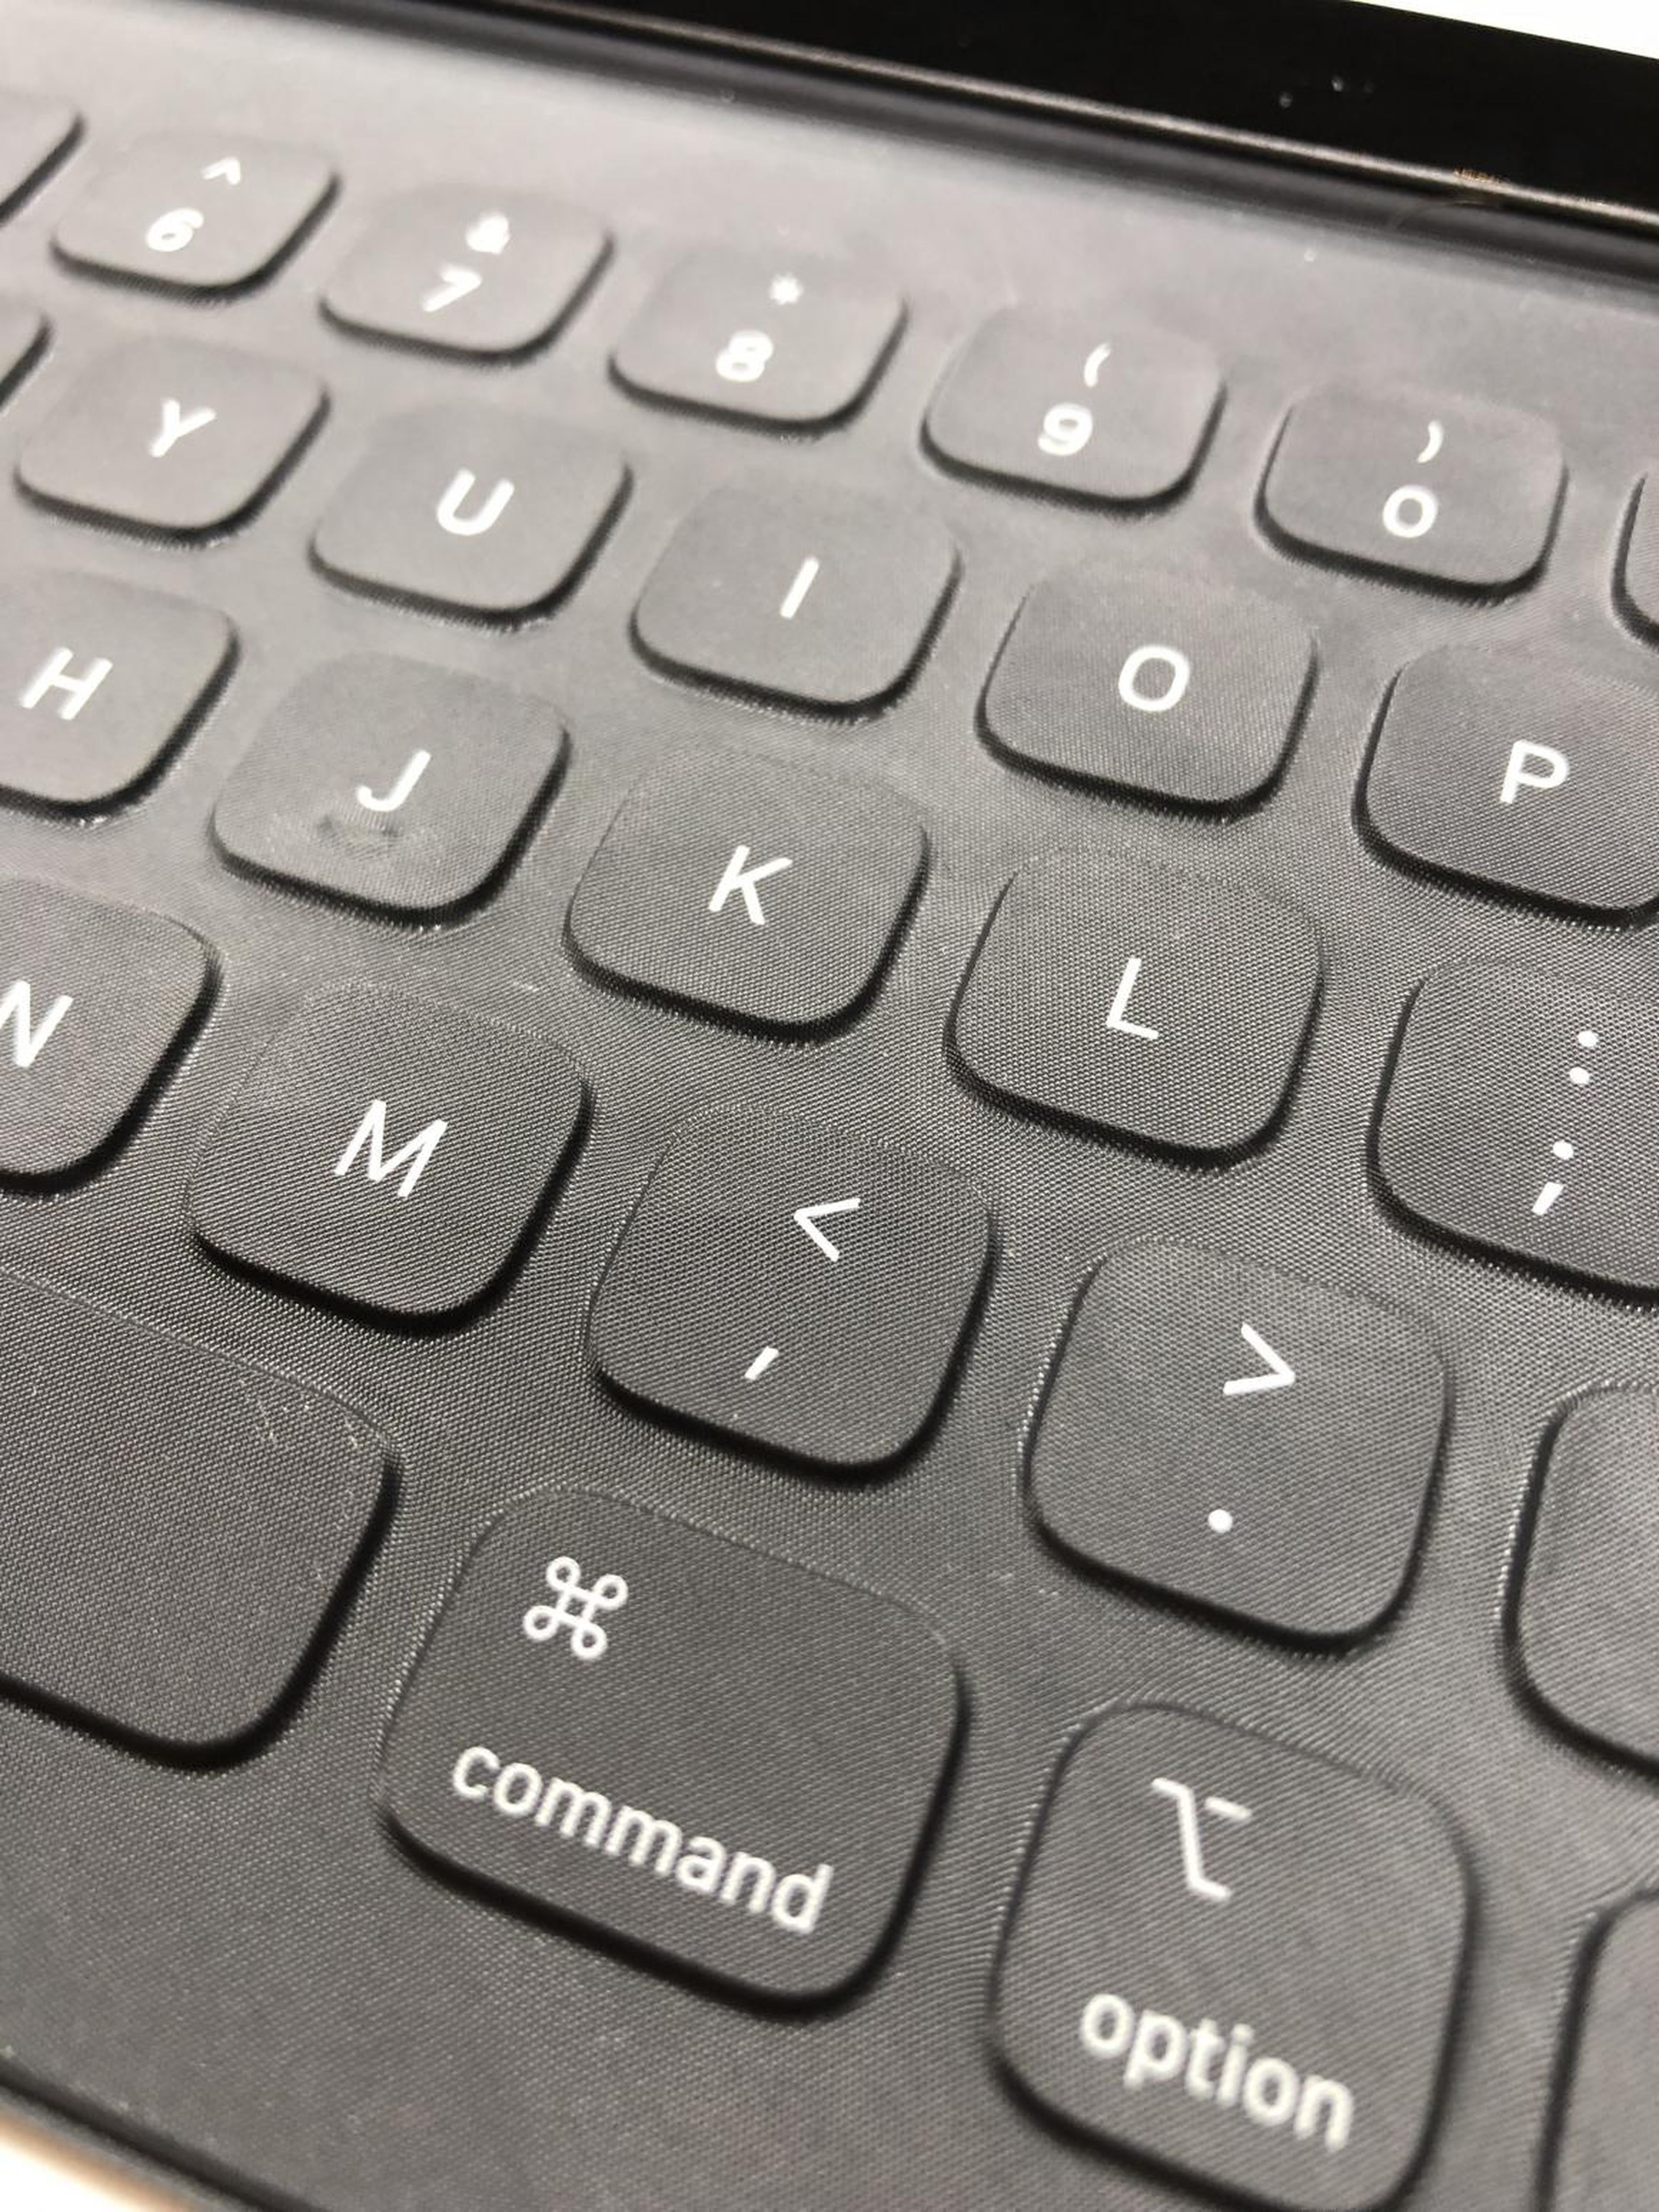 See how deep these keys are? They're also covered with some kind of textured cloth. Only time will tell how well it holds up to daily use.